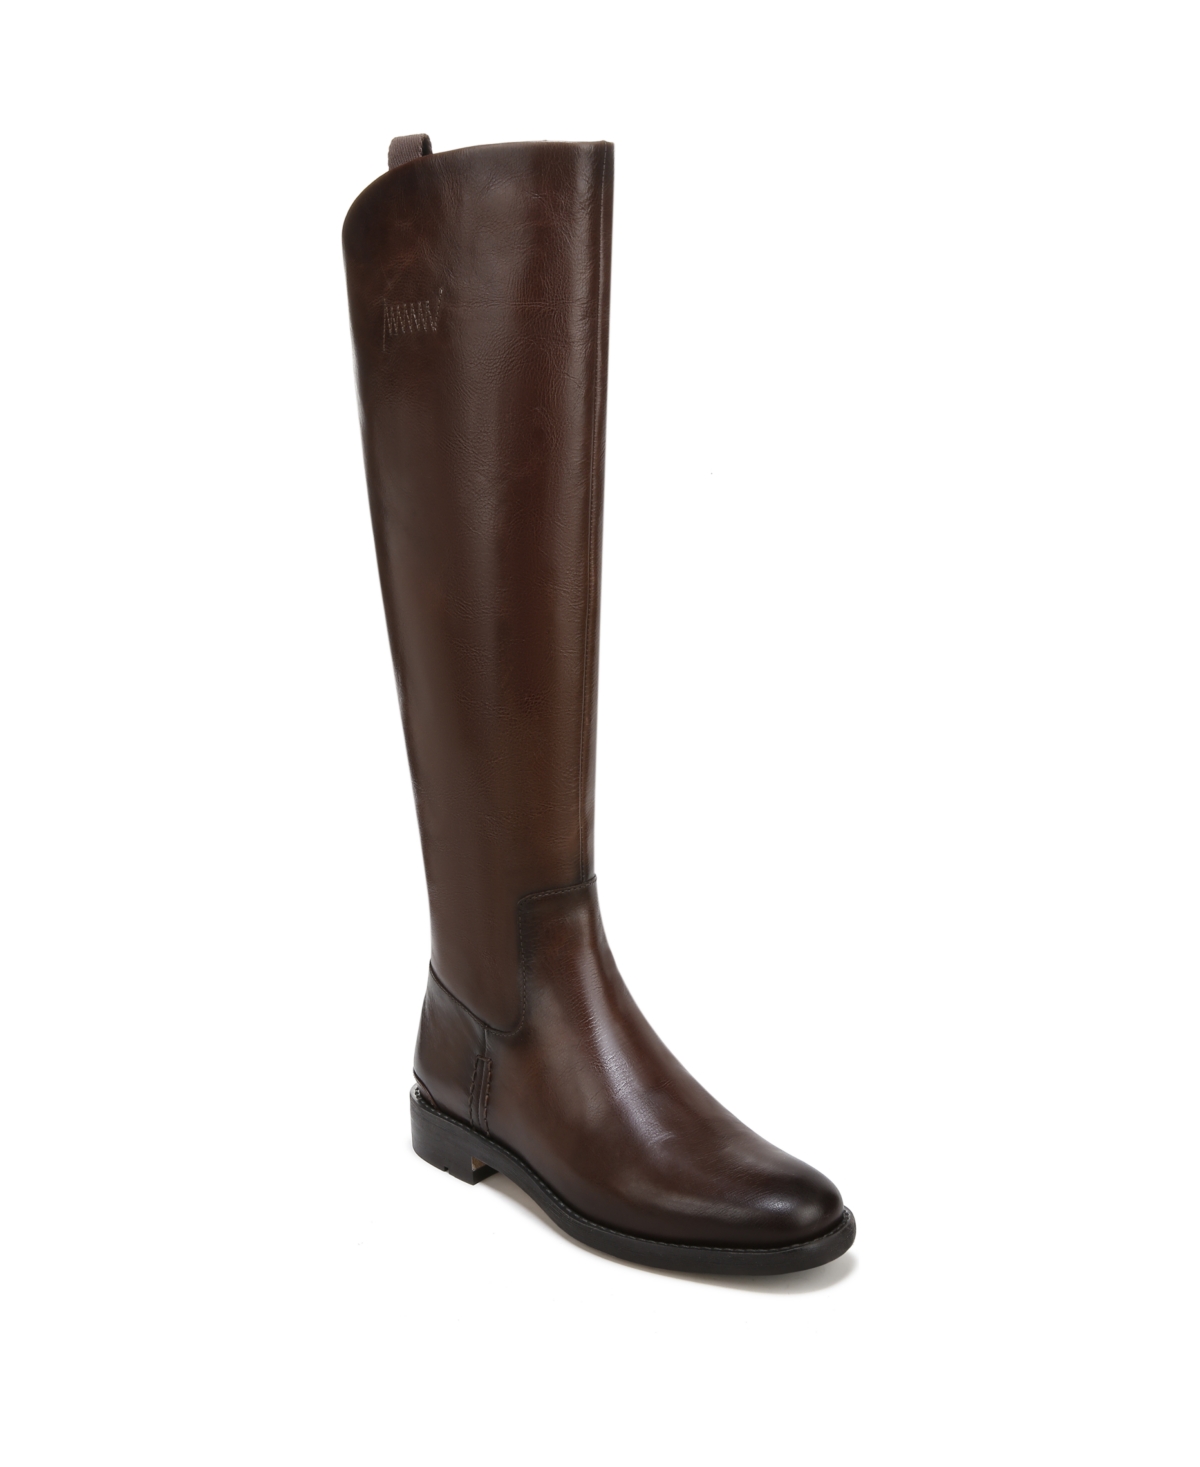 Meyer Narrow Calf Knee High Riding Boots - Brown Leather